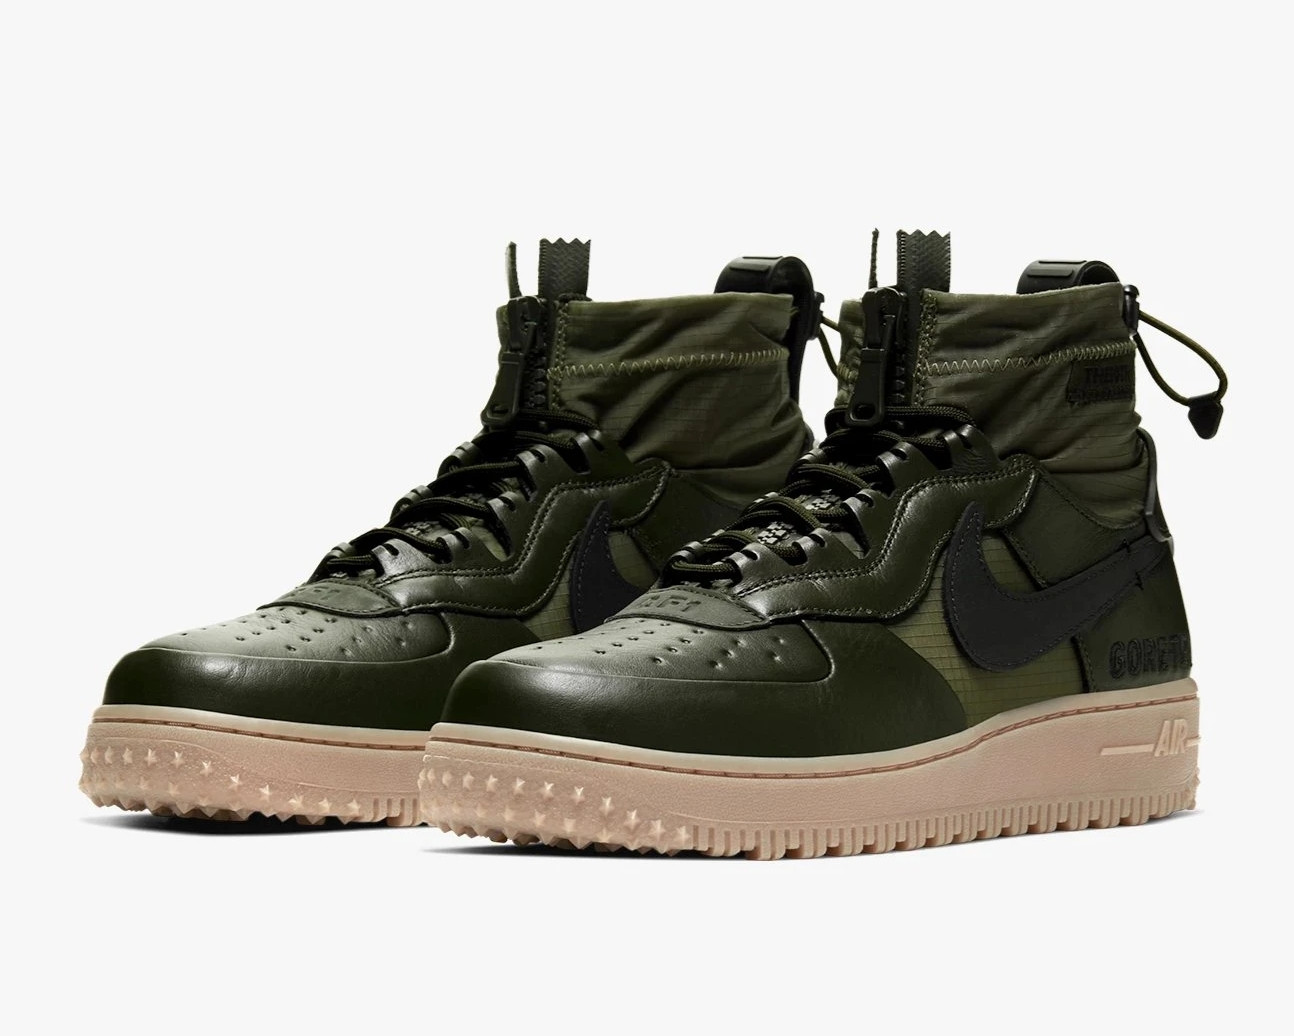 Tex x Nike Air Force 1 High Olive Green Brown CQ7211 - GmarShops - Where Buy the Dunk Low Fossil - Gore - 300